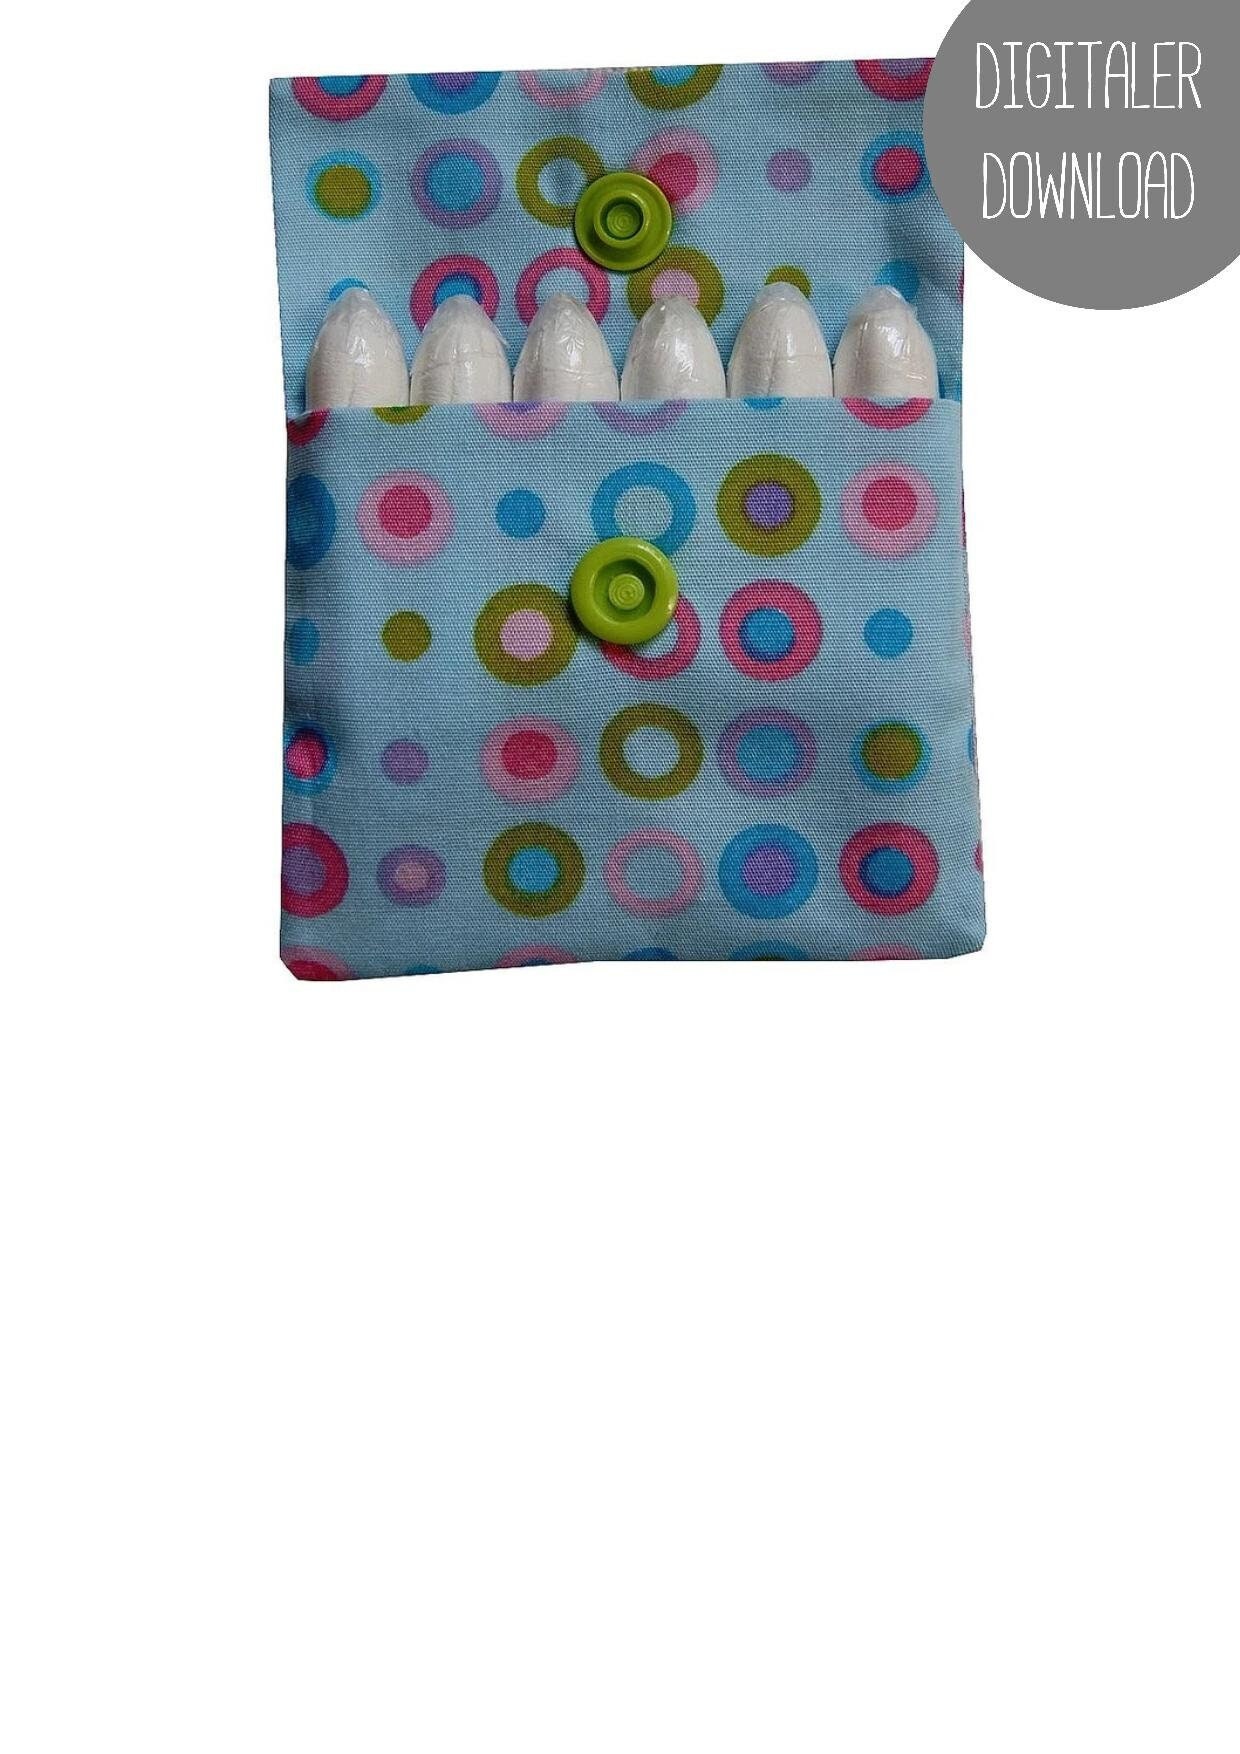 Tampon Case, Sanitary Pad Holder, Clutch Pattern, Tampon Wallet, Pad Holder  PDF Sewing Pattern and Instruction, Instant Download W-e001 